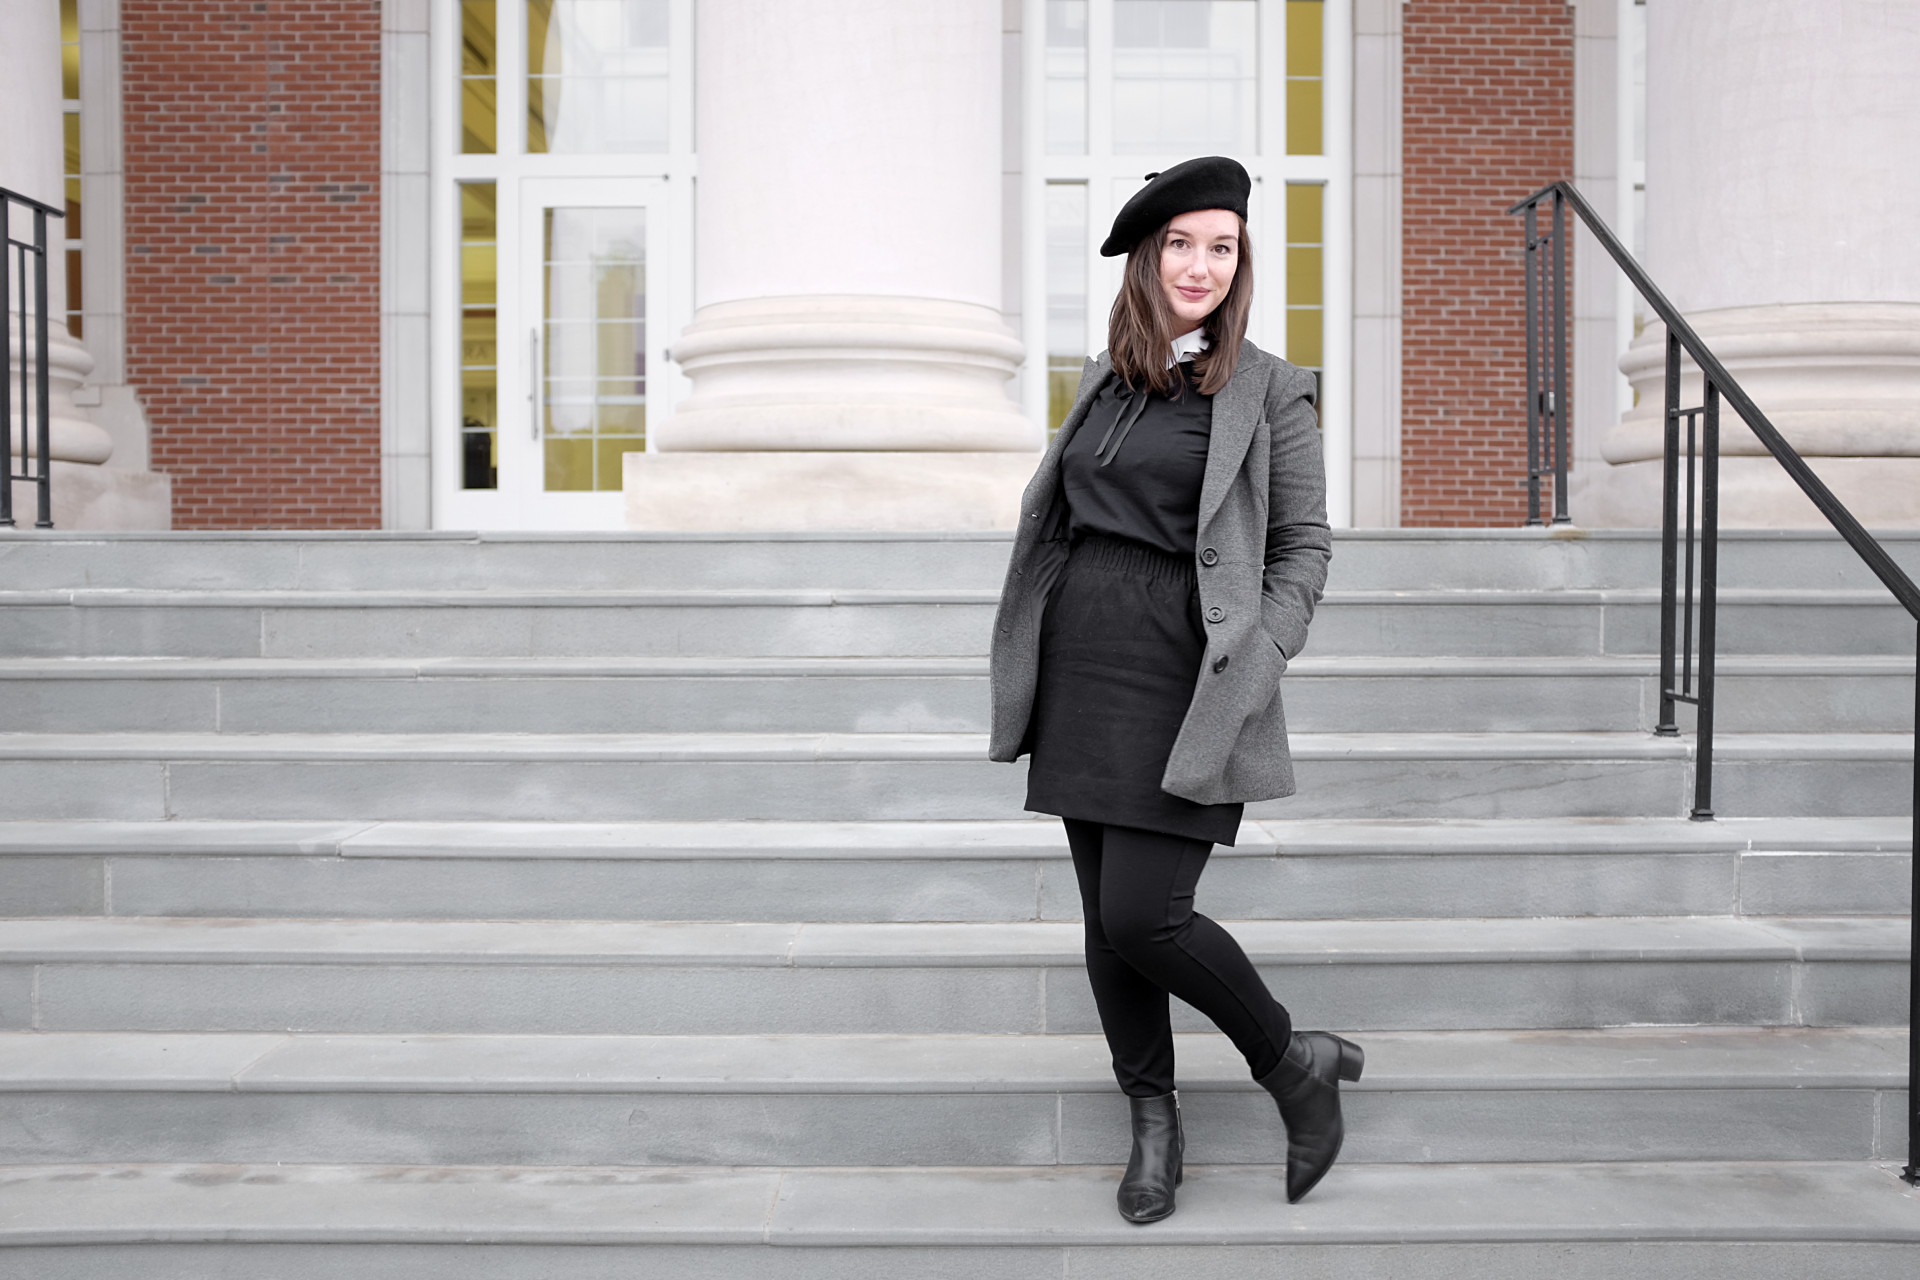 A white woman stands on steps with columns in the background. She is wearing a black beret, a white collared shirt under a black sweatshirt, a black wool skirt, a pair of black pants, black boots, and a grey coat.